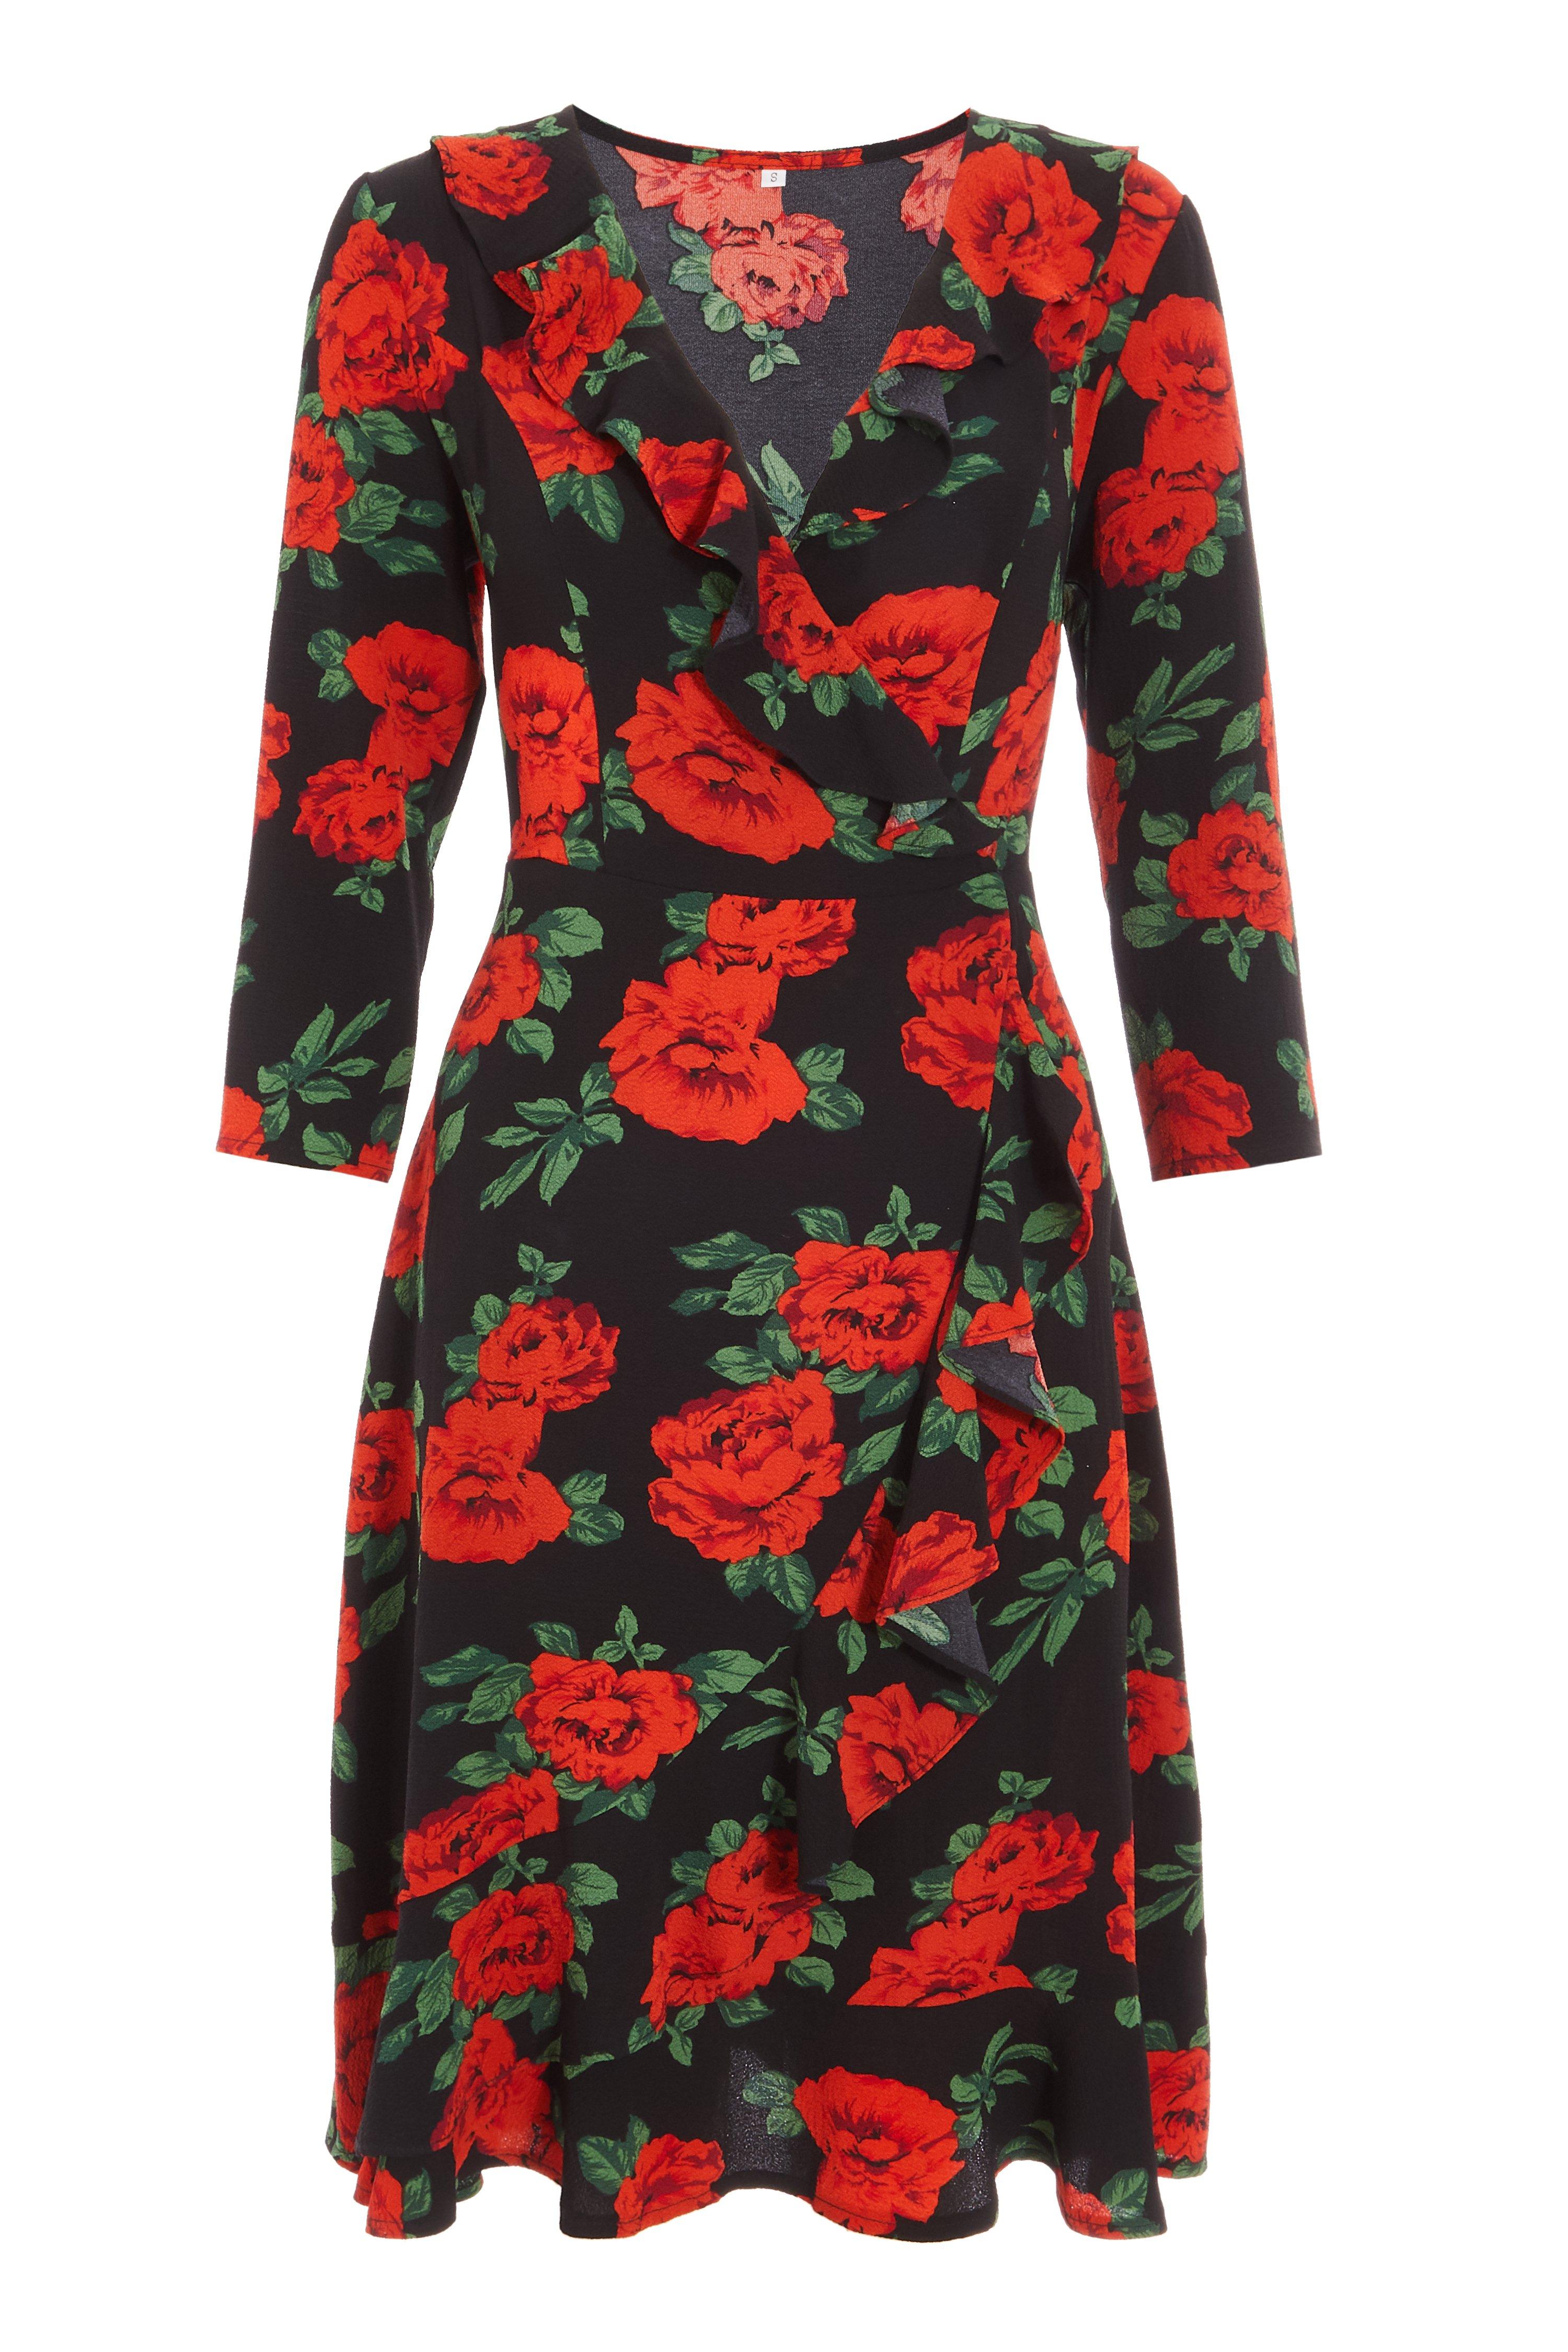 Black and Red Floral Wrap Midi Dress - Quiz Clothing